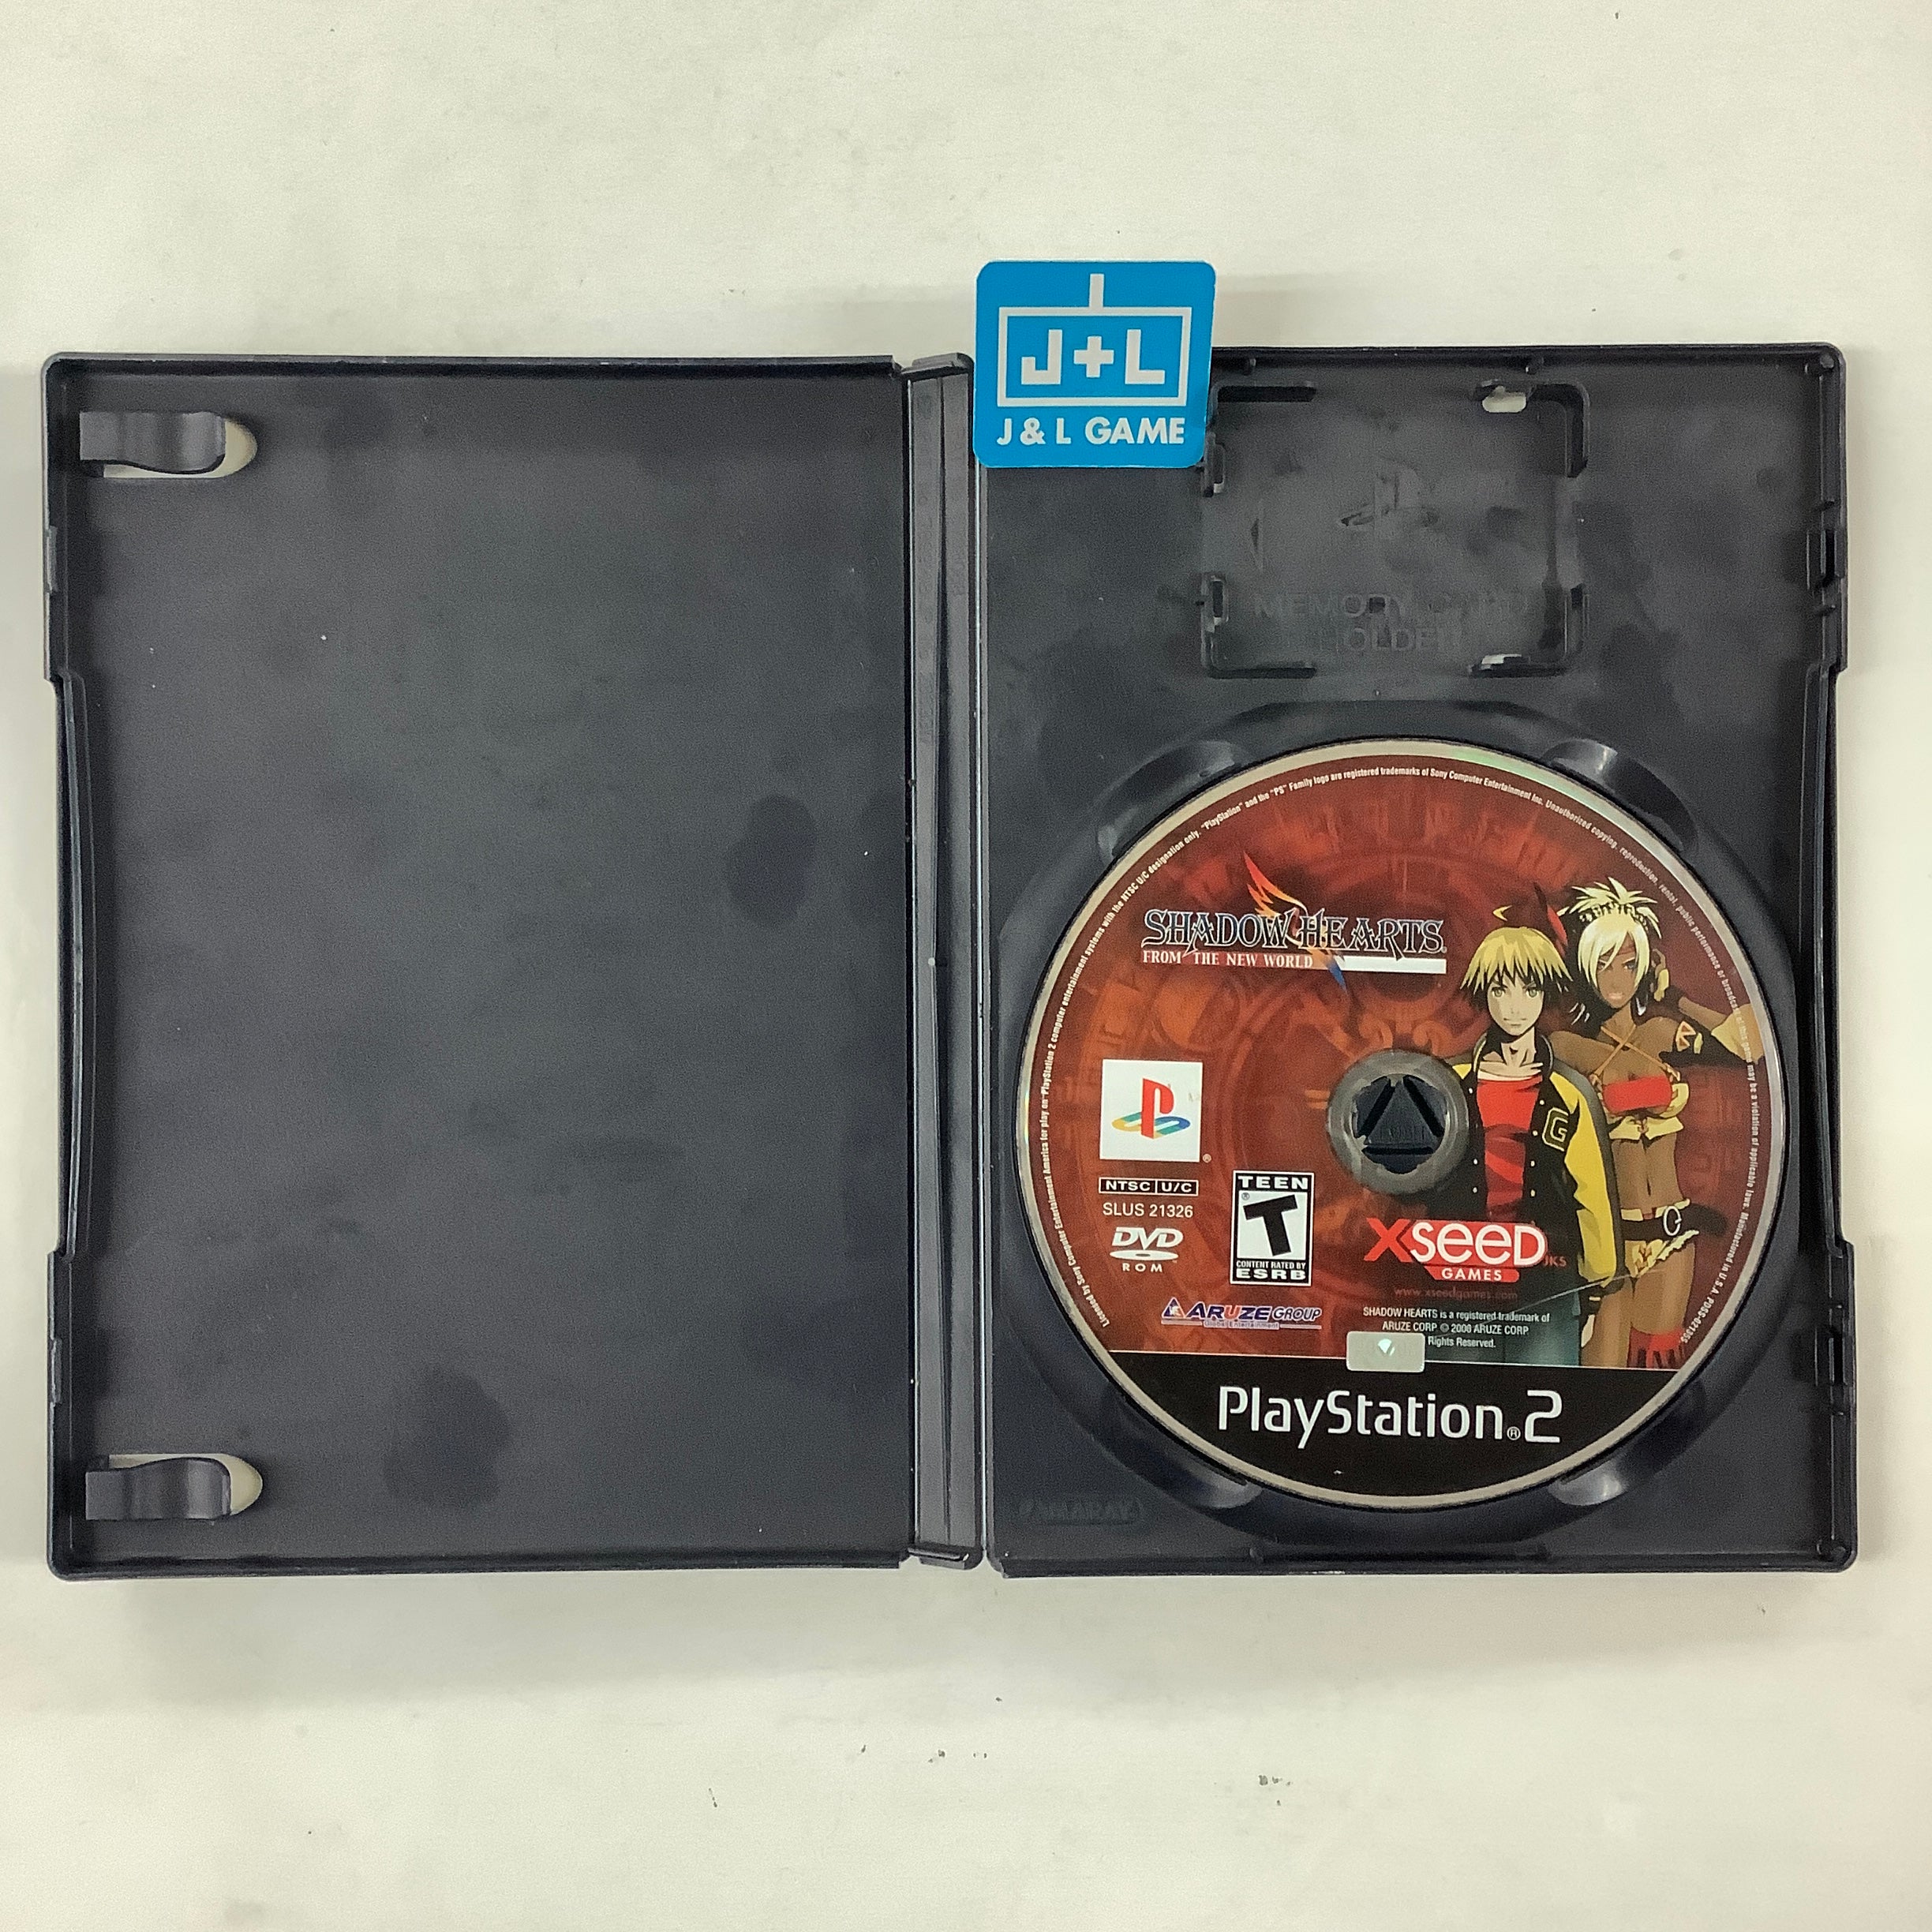 Shadow Hearts: From the New World - (PS2) PlayStation 2 [Pre-Owned] Video Games XSEED Games   